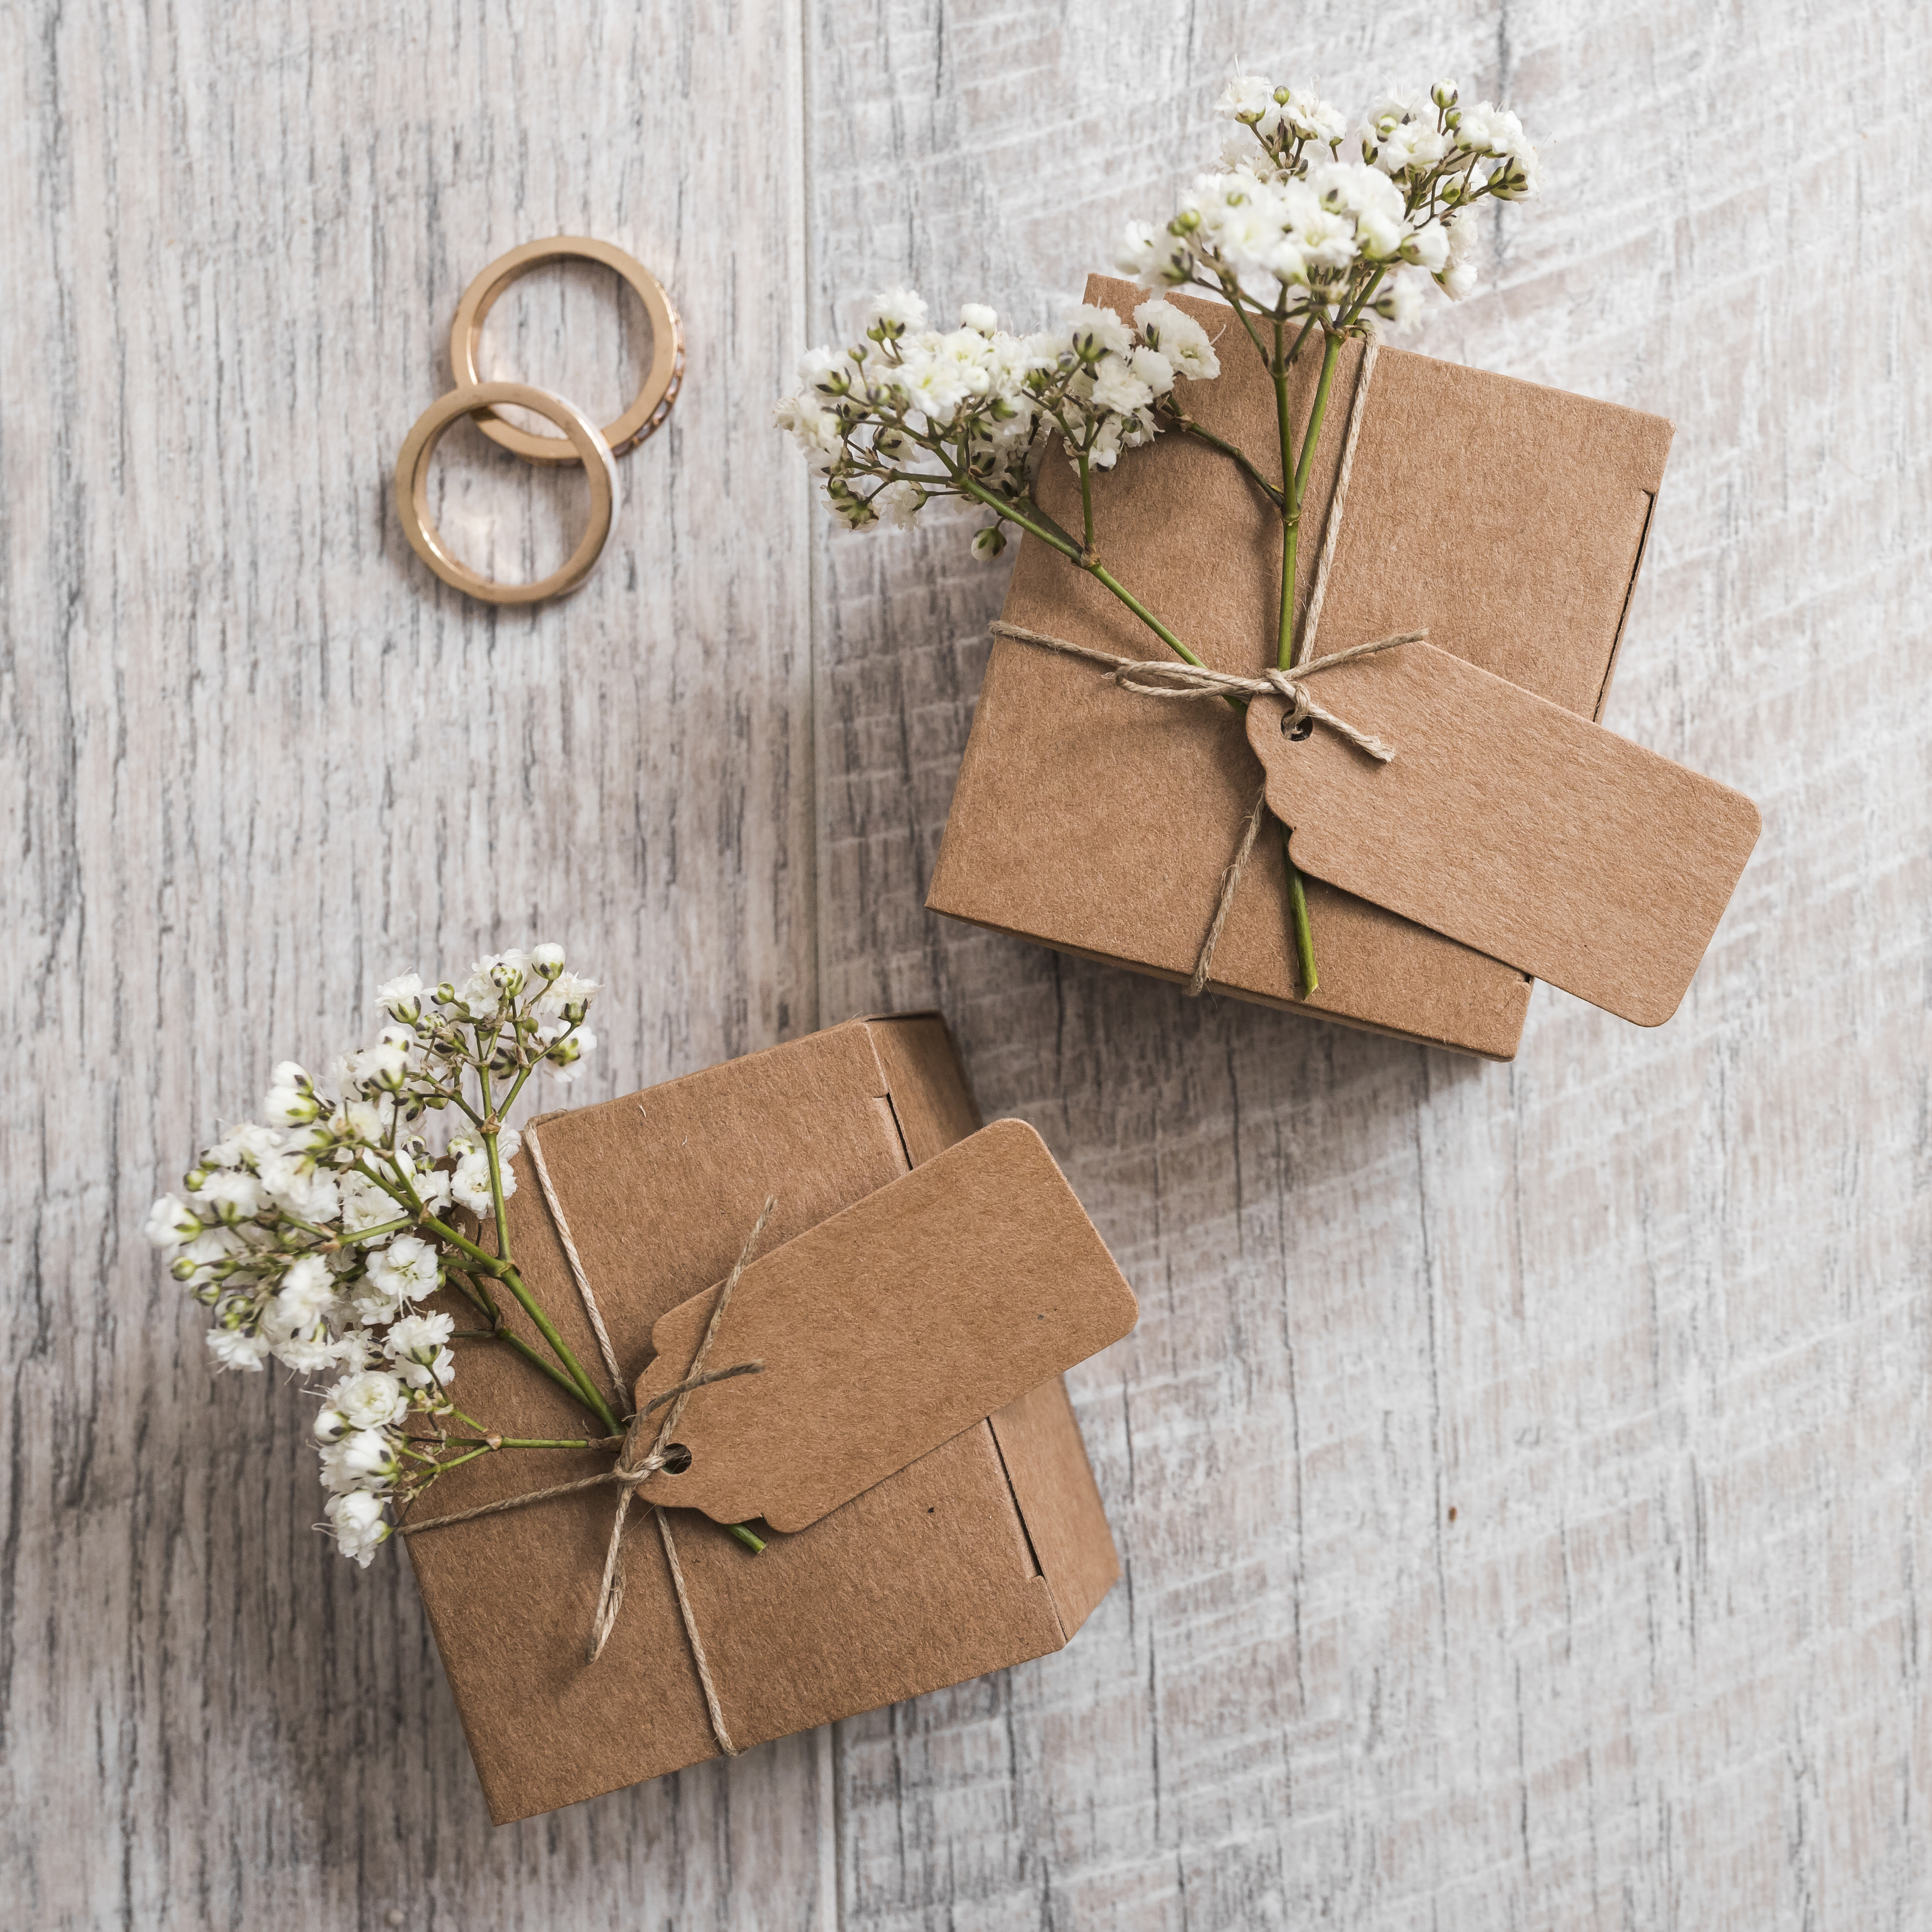 weeding-rings-with-cardboard-boxes-wooden-plank